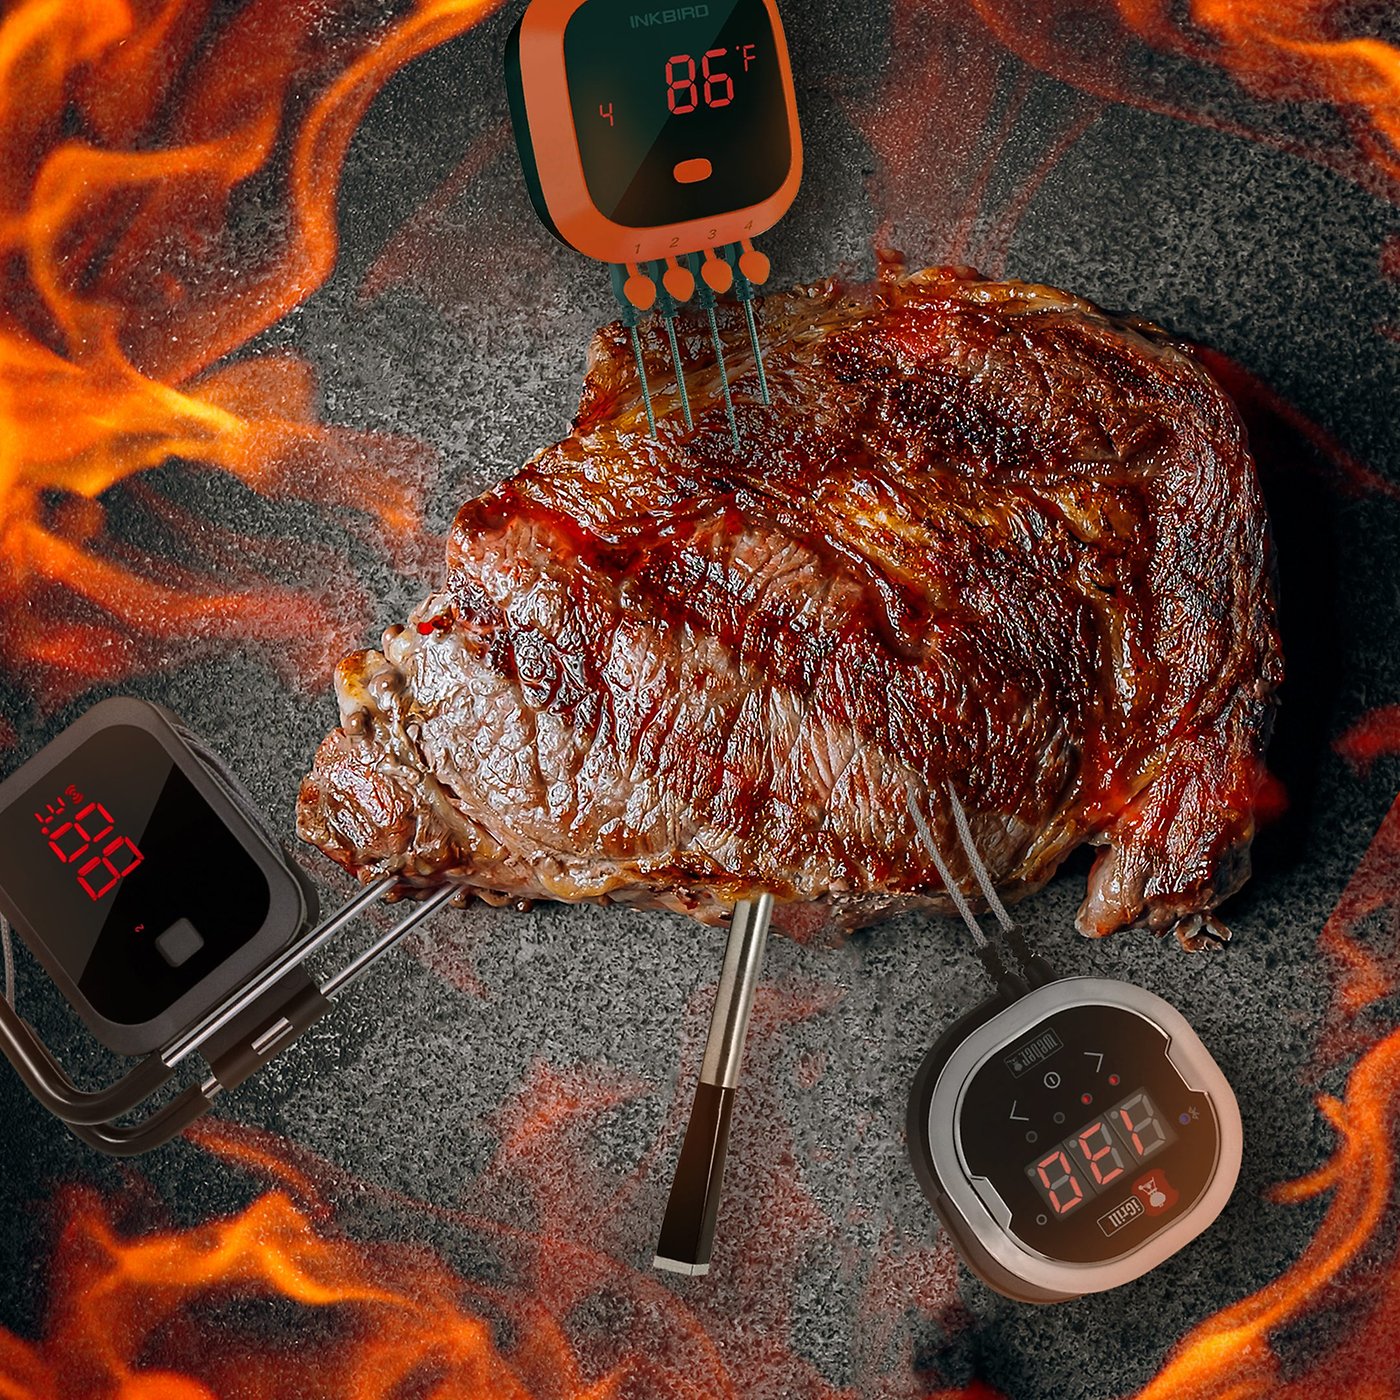 INKBIRD Handy Meat Thermometer with IR Detector 3-In-1